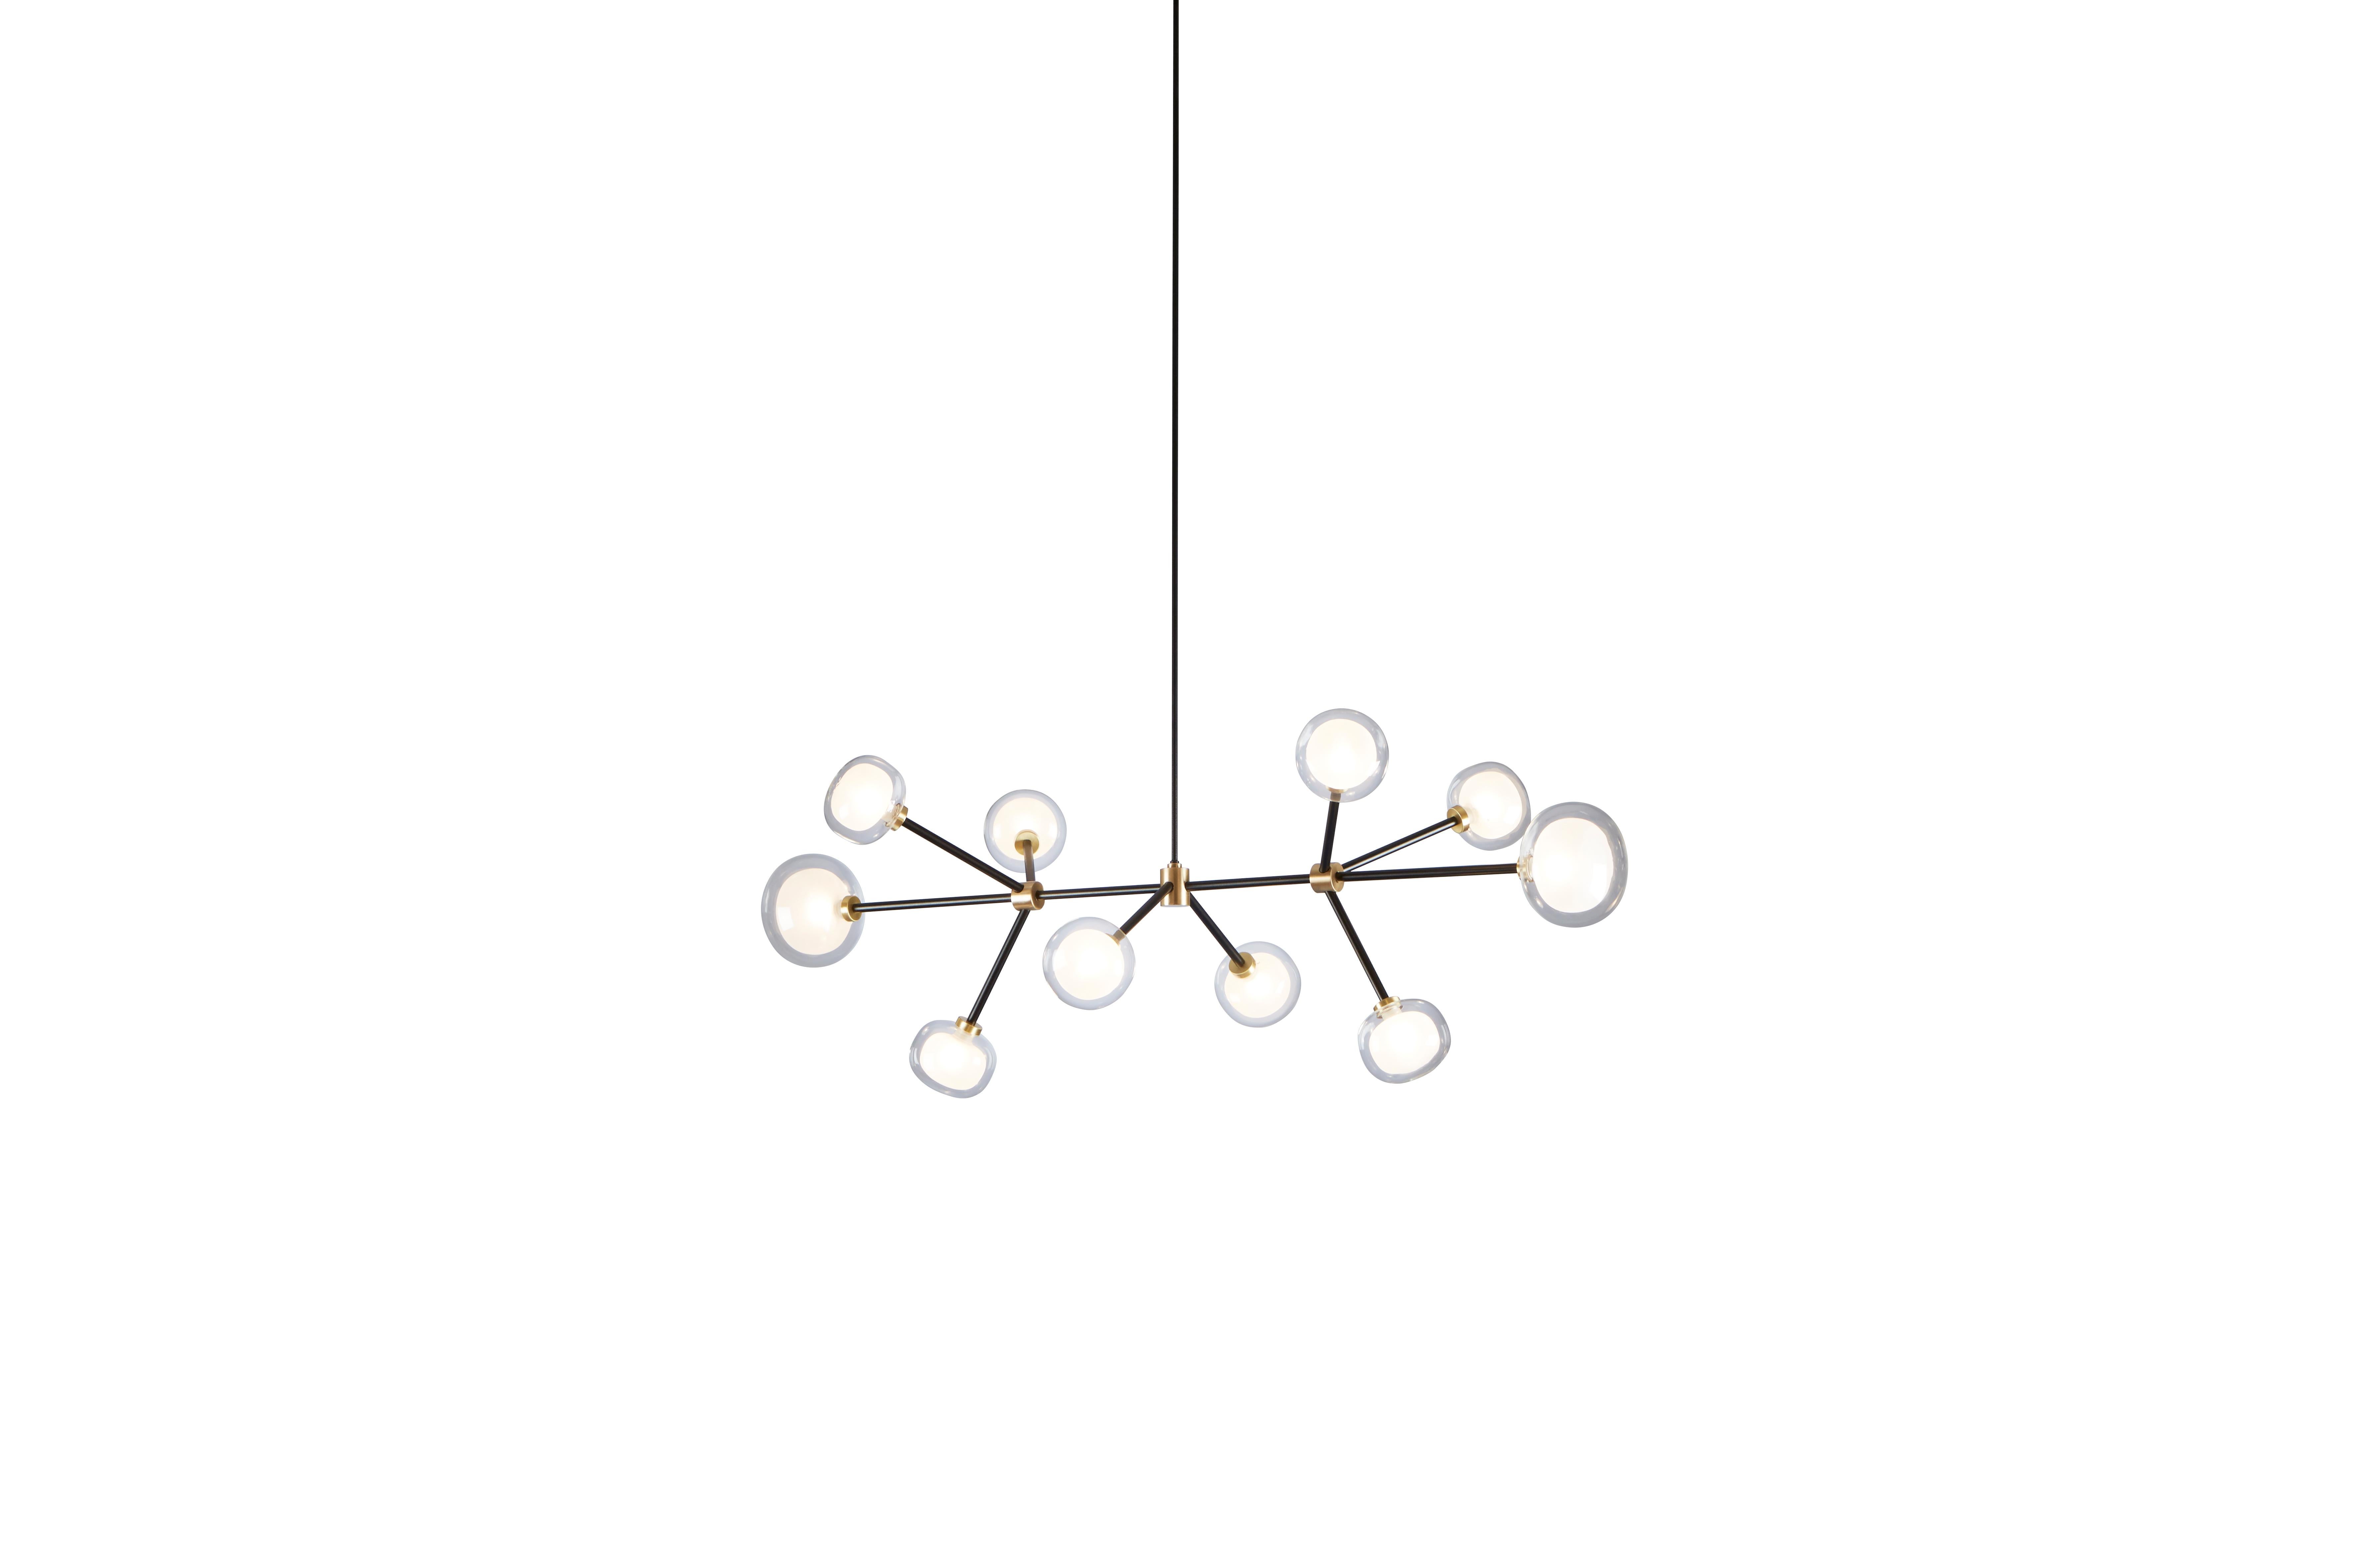 Chandelier Nabila 552.10 by Corrado Dotti x TOOY
10 Lights
UL Listed Compliant with US electric system

Model shown:
Finish: Brushed brass
Color: Clear glass
Canopy: Ø 13 cm

Lighting source : 10 x G9 220/240V

Pendant: Cable length 30/ 60 / 90 cm.